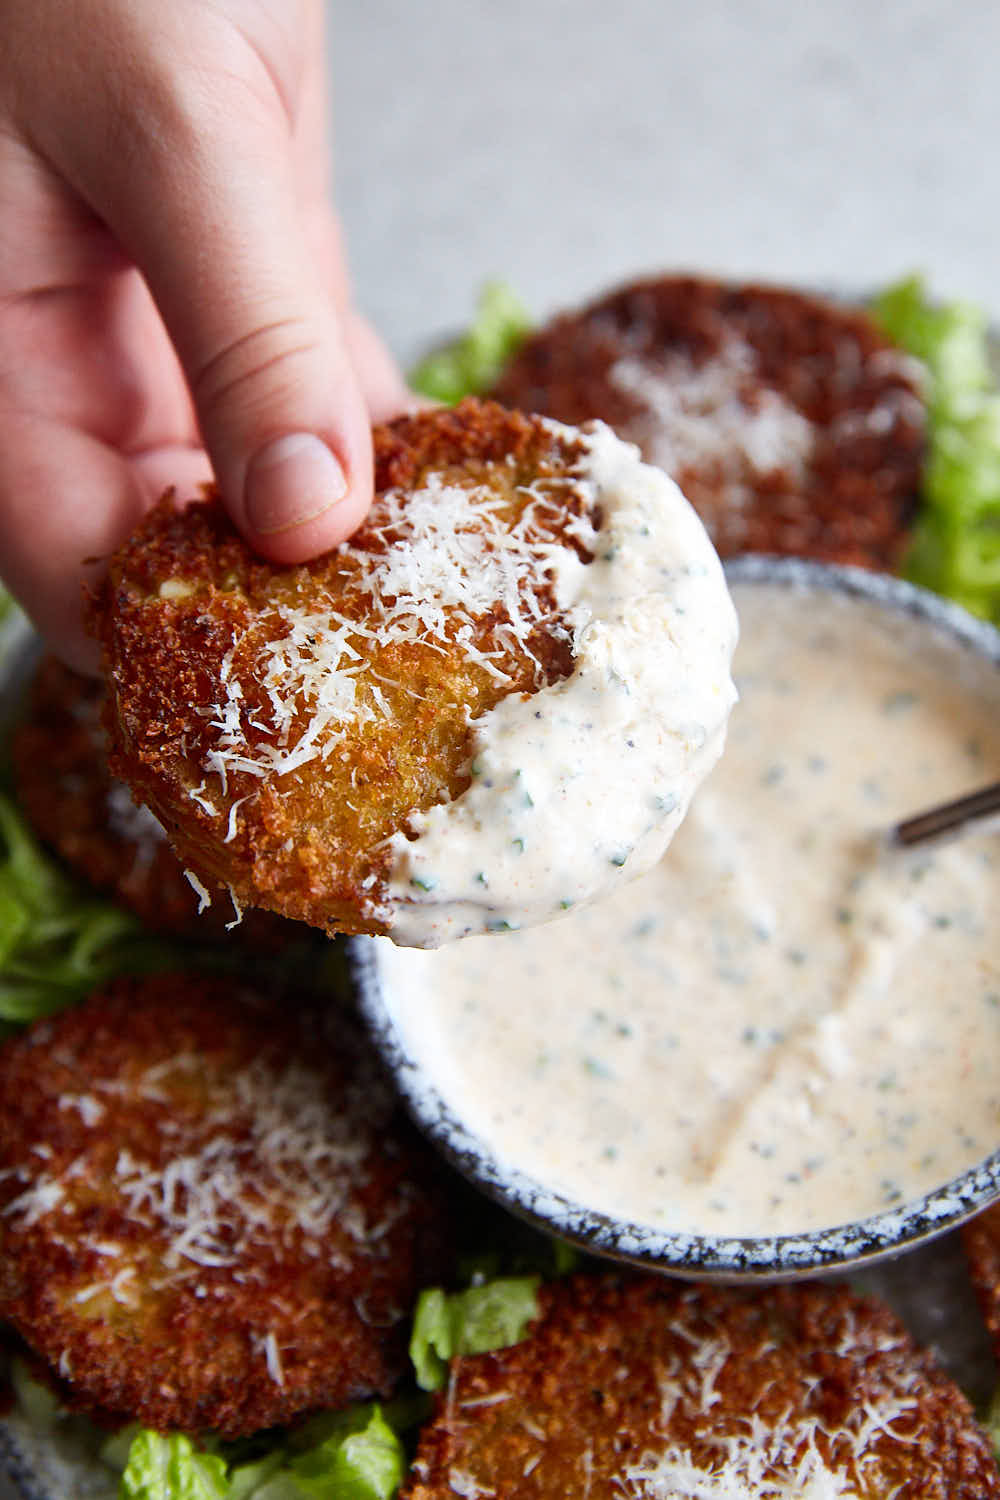 Fried Green Tomatoes dipped in white dipping sauce